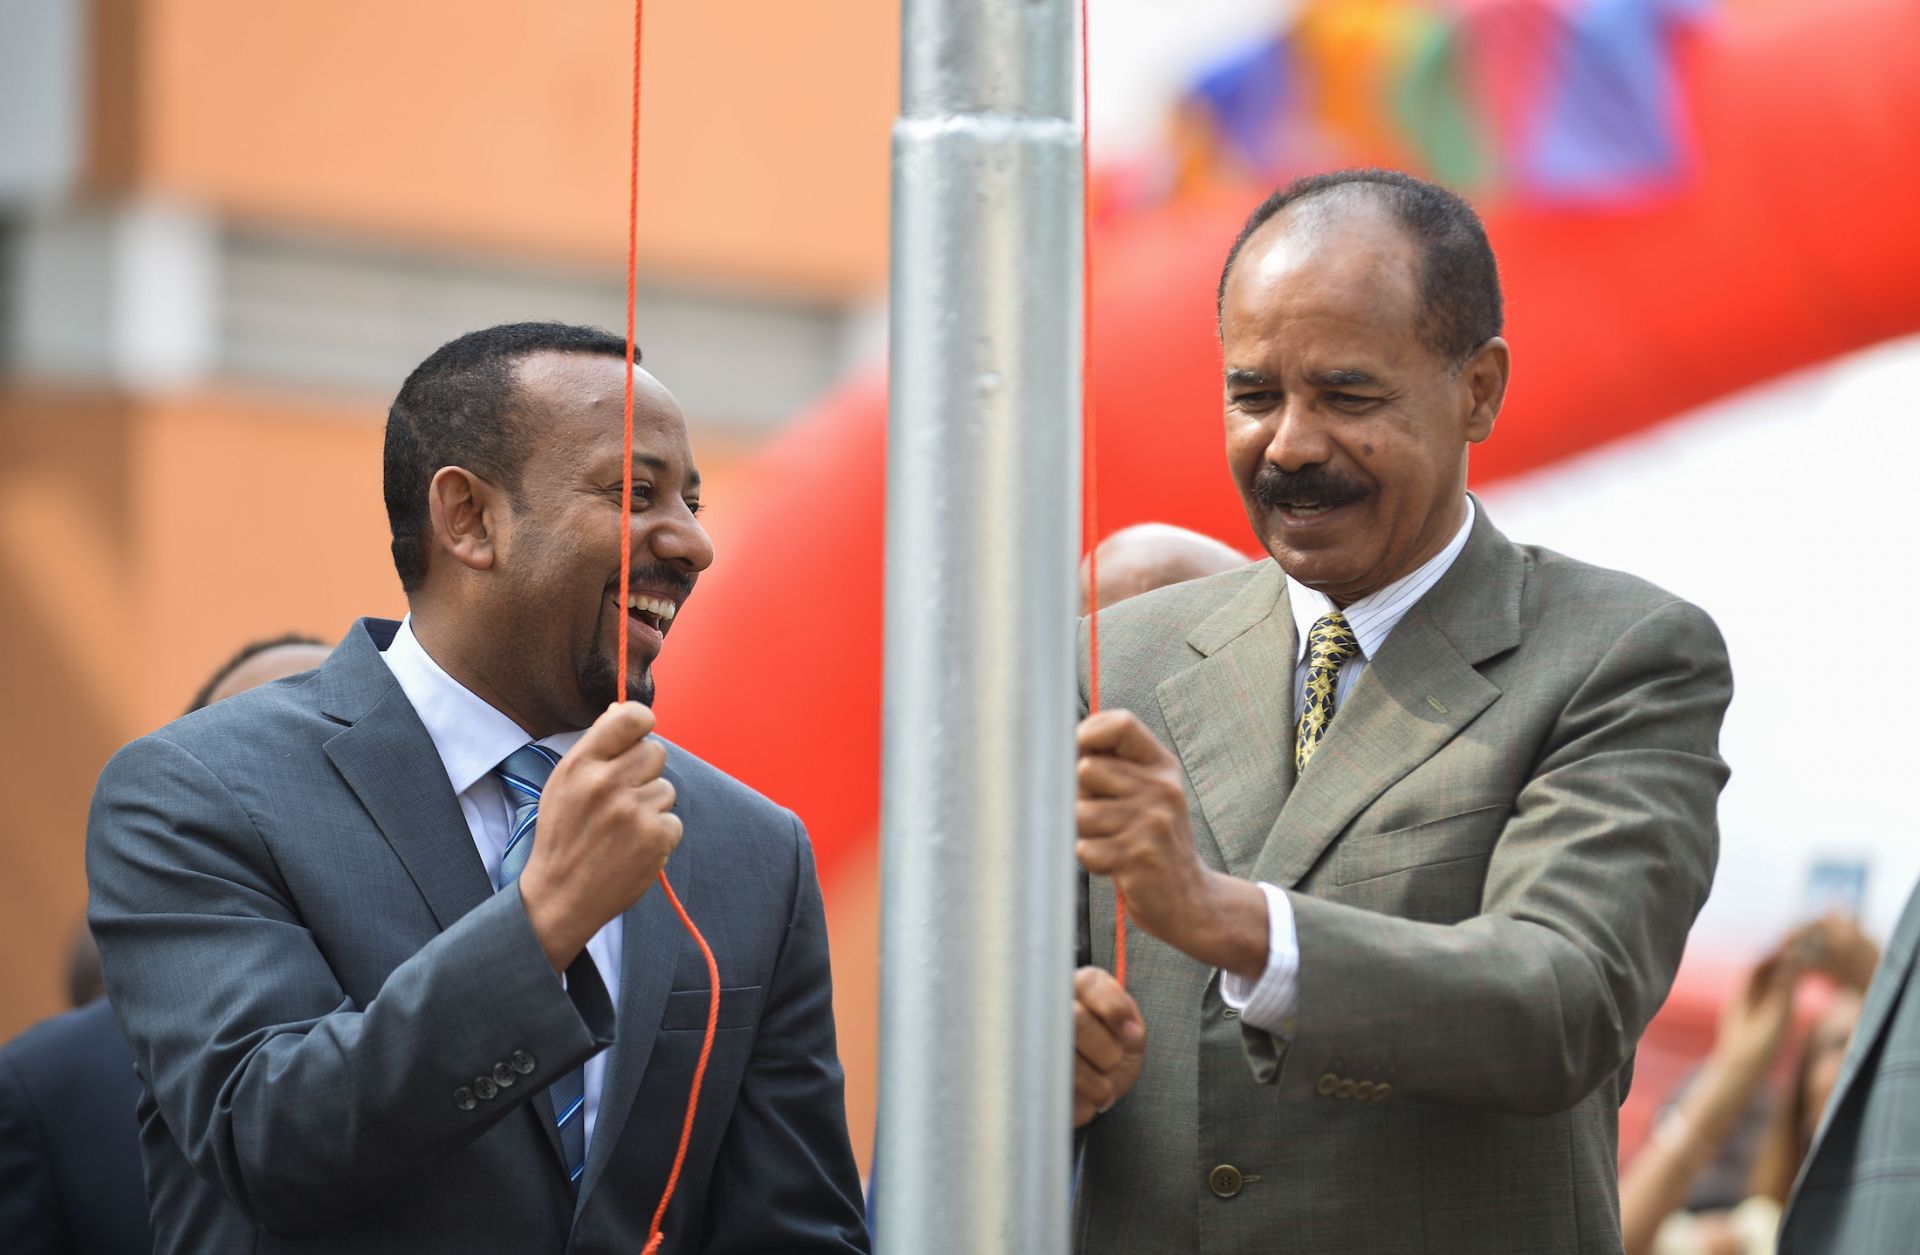 Abiy Ahmed (L), Ethiopia's prime minister, marks the reopening of the Eritrean Embassy in Addis Ababa on July 16, 2018, alongside Ertirea's president, Isaias Afwerki (R).